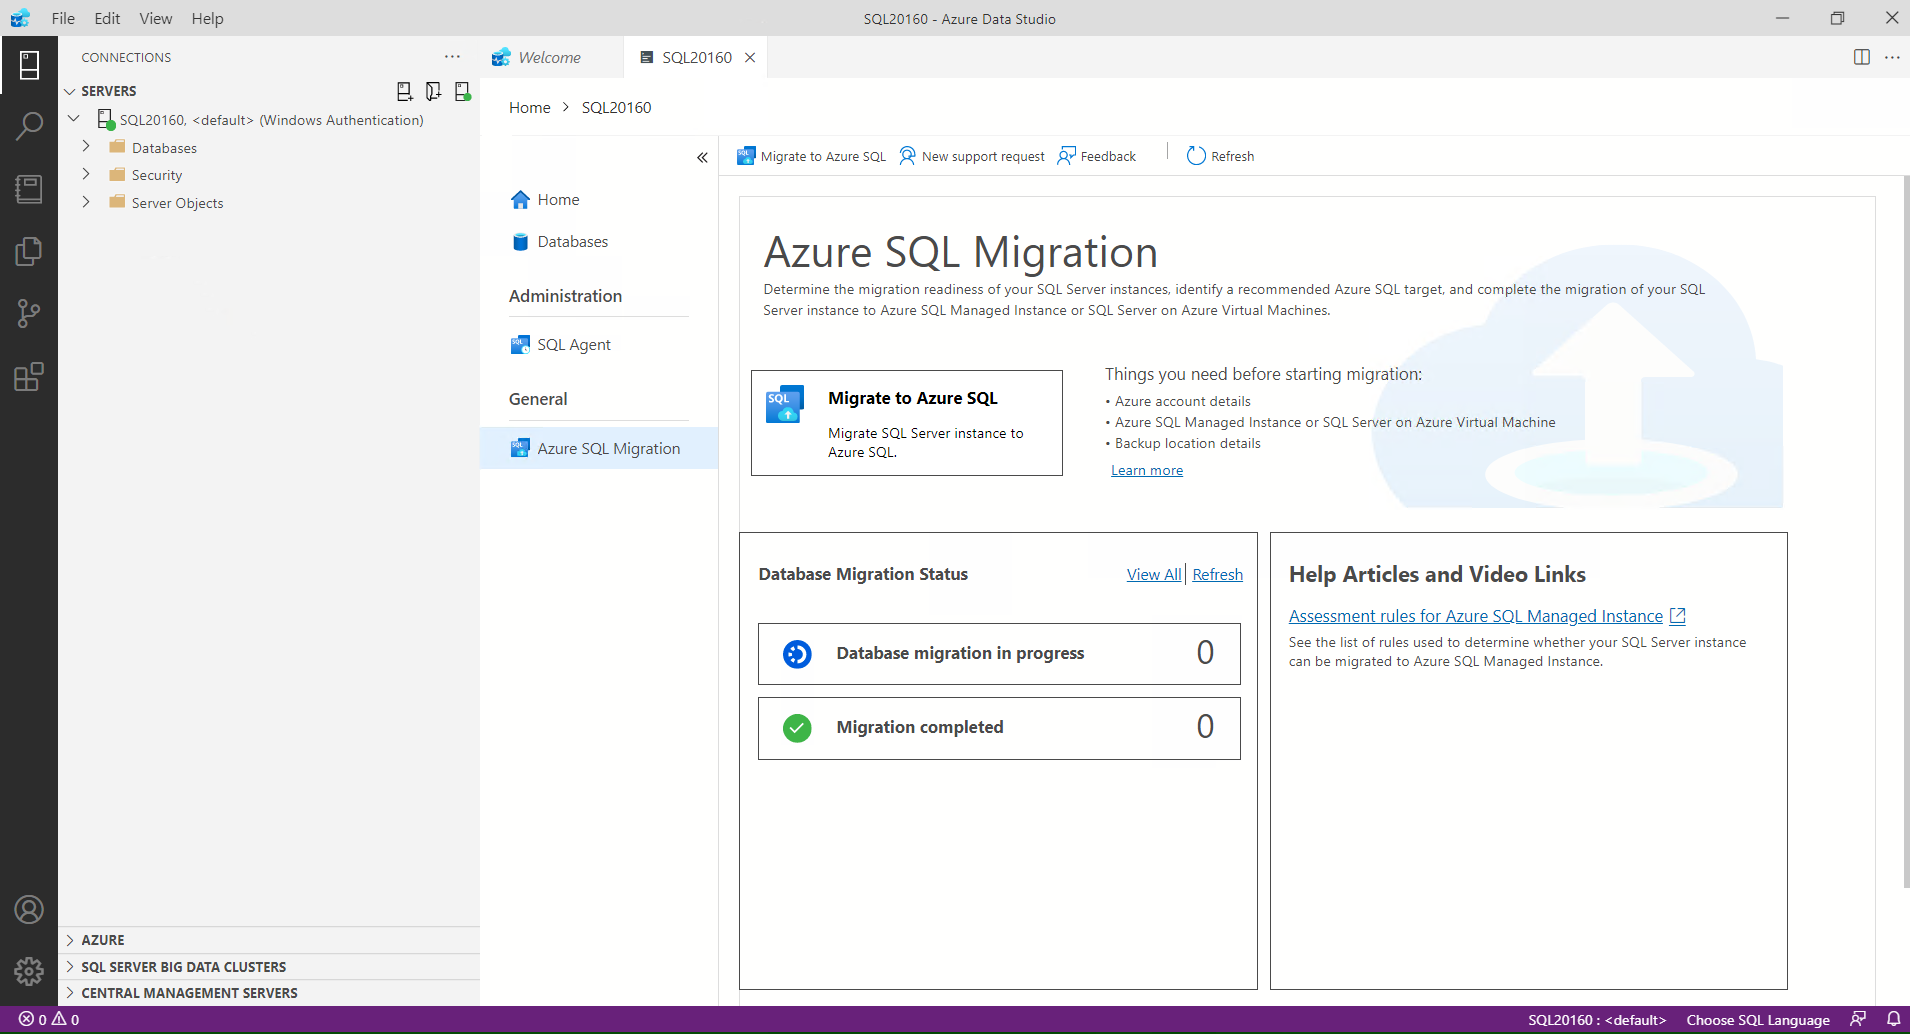 Launch Migrate to Azure SQL wizard